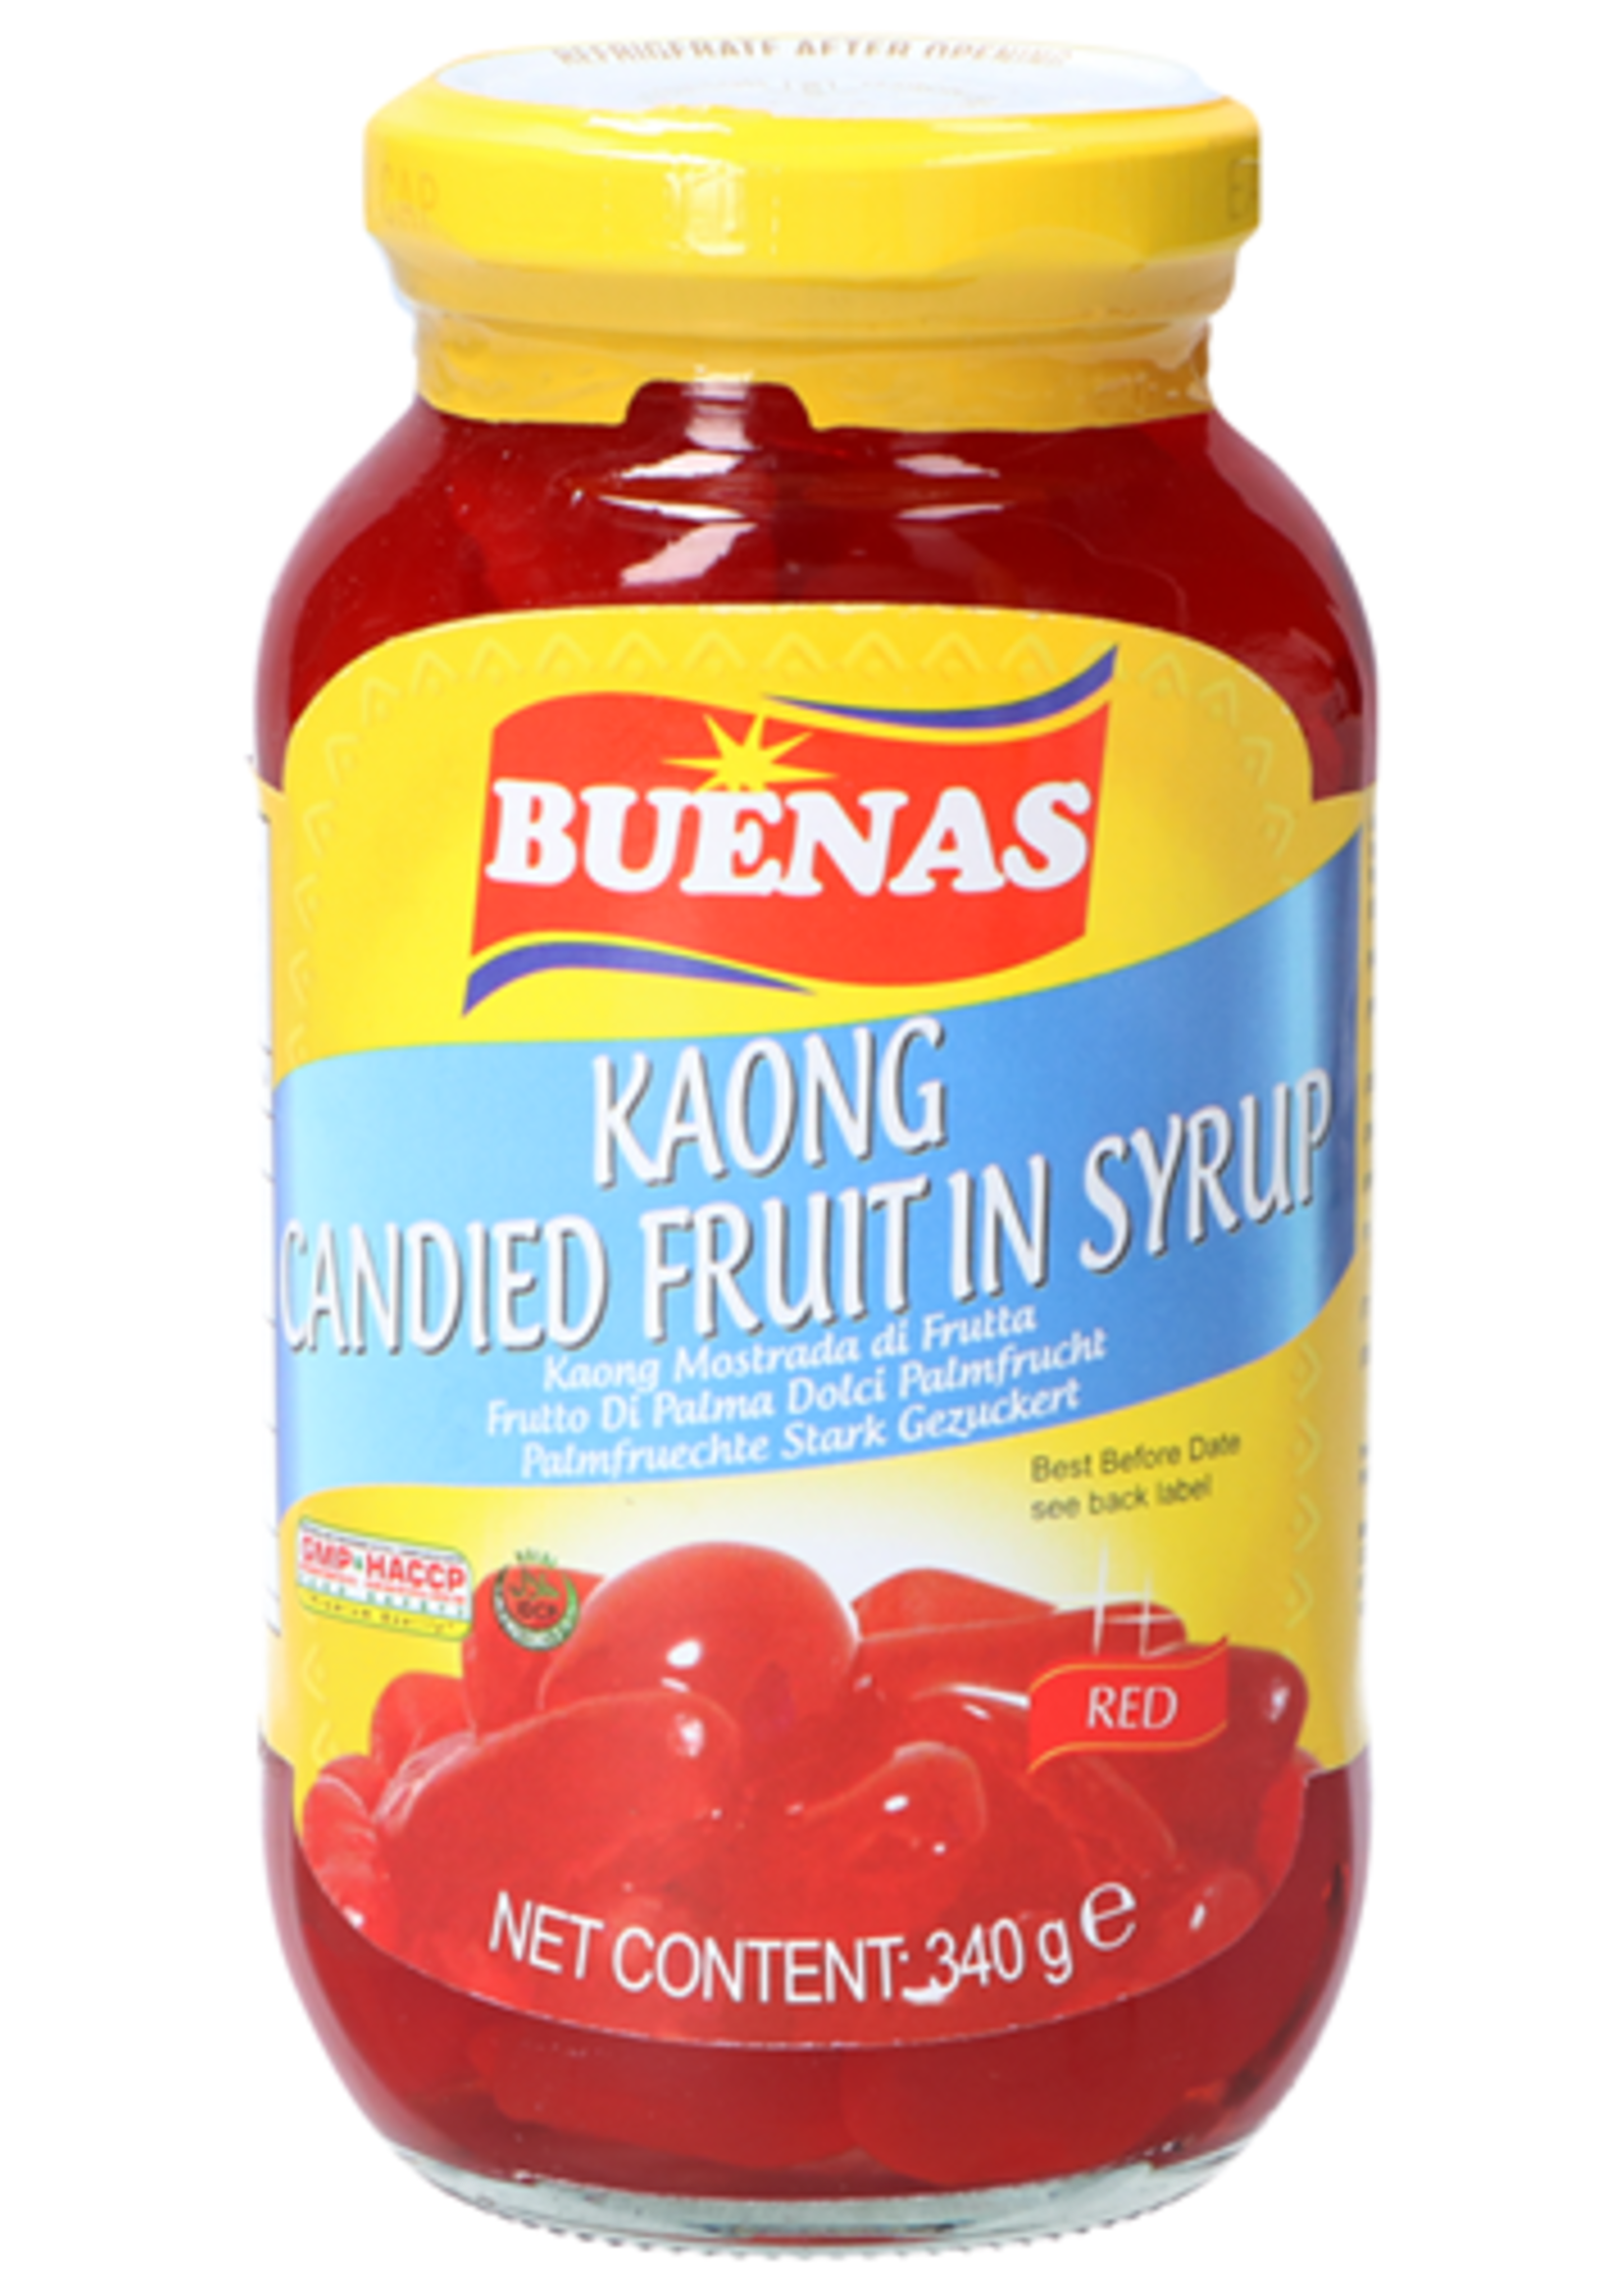 Buenas Buenas Kaong Red Candied Fruit in Syrup